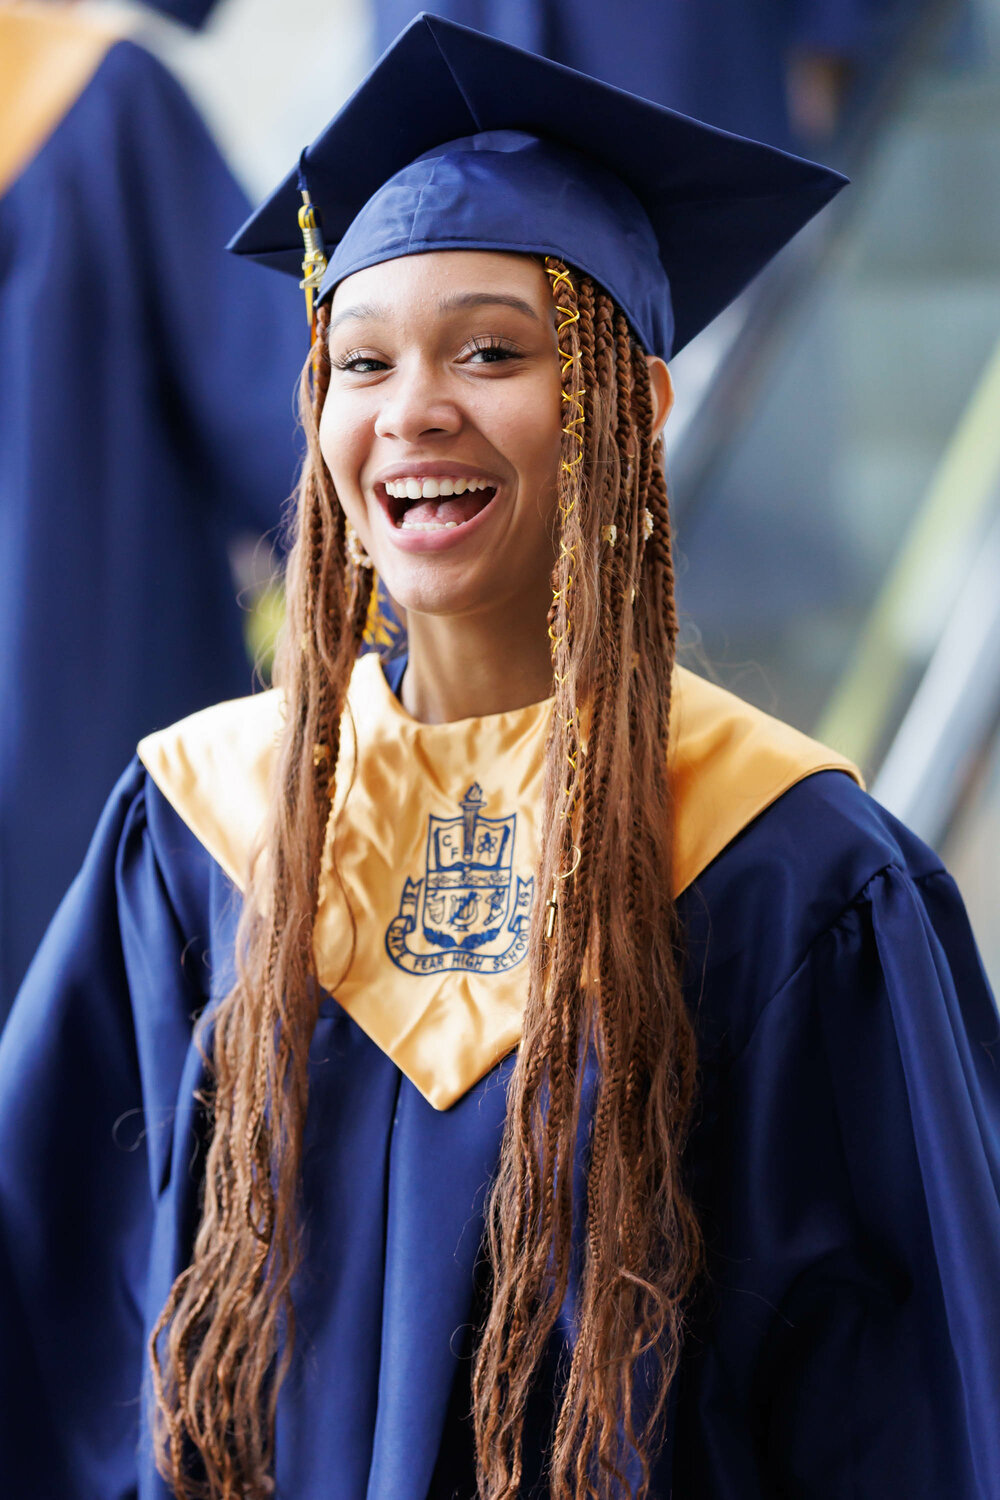 Cape Fear High valedictorian challenges classmates to be resilient